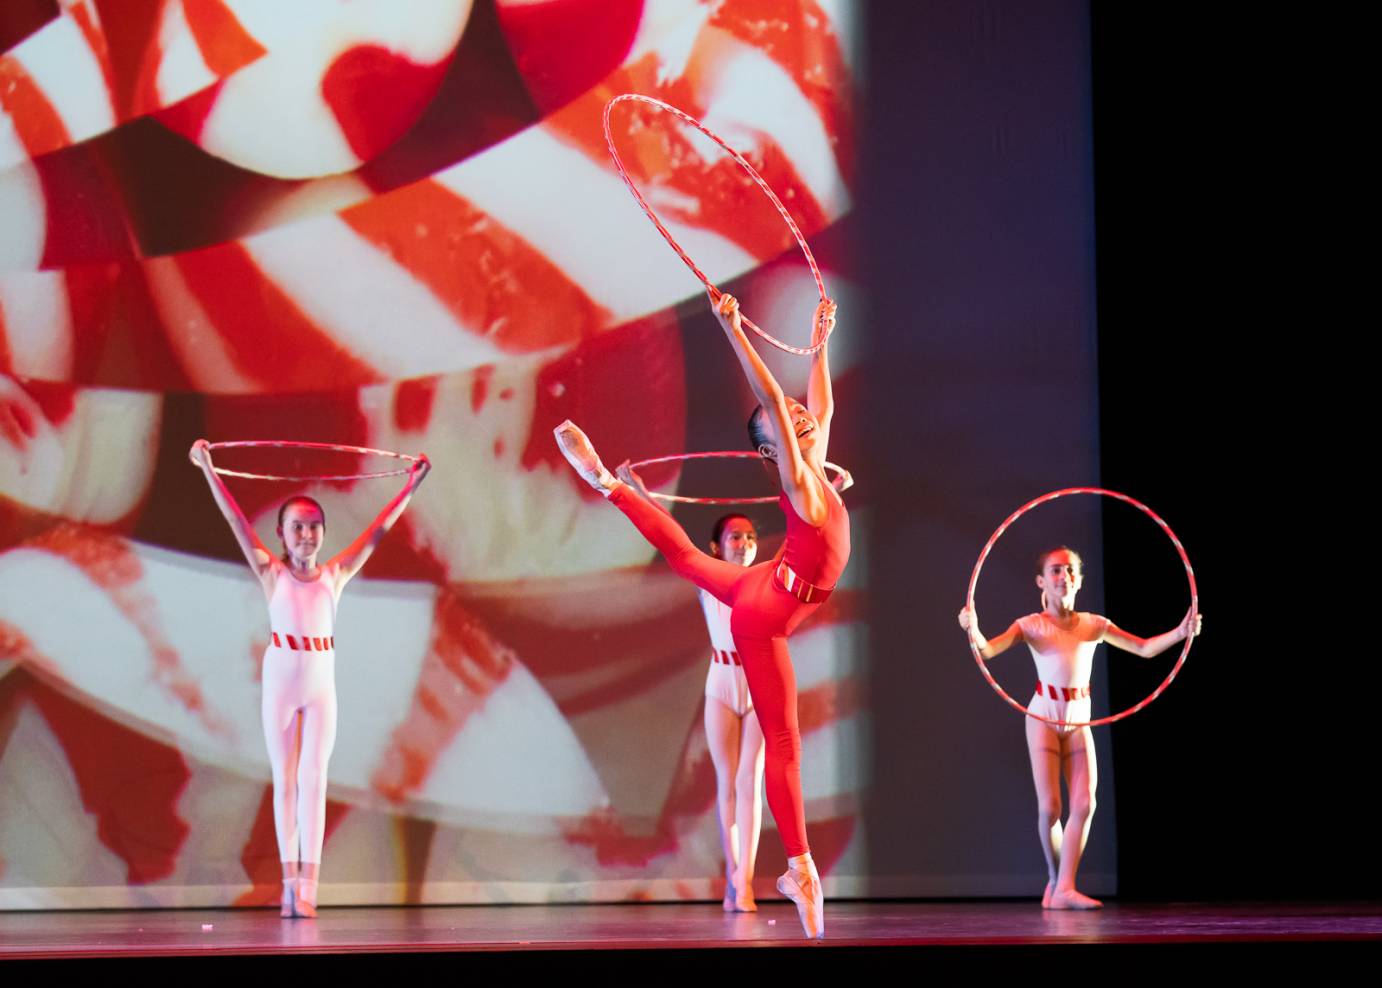 A young dancer in red executes a high attitude while holding a striped hoop